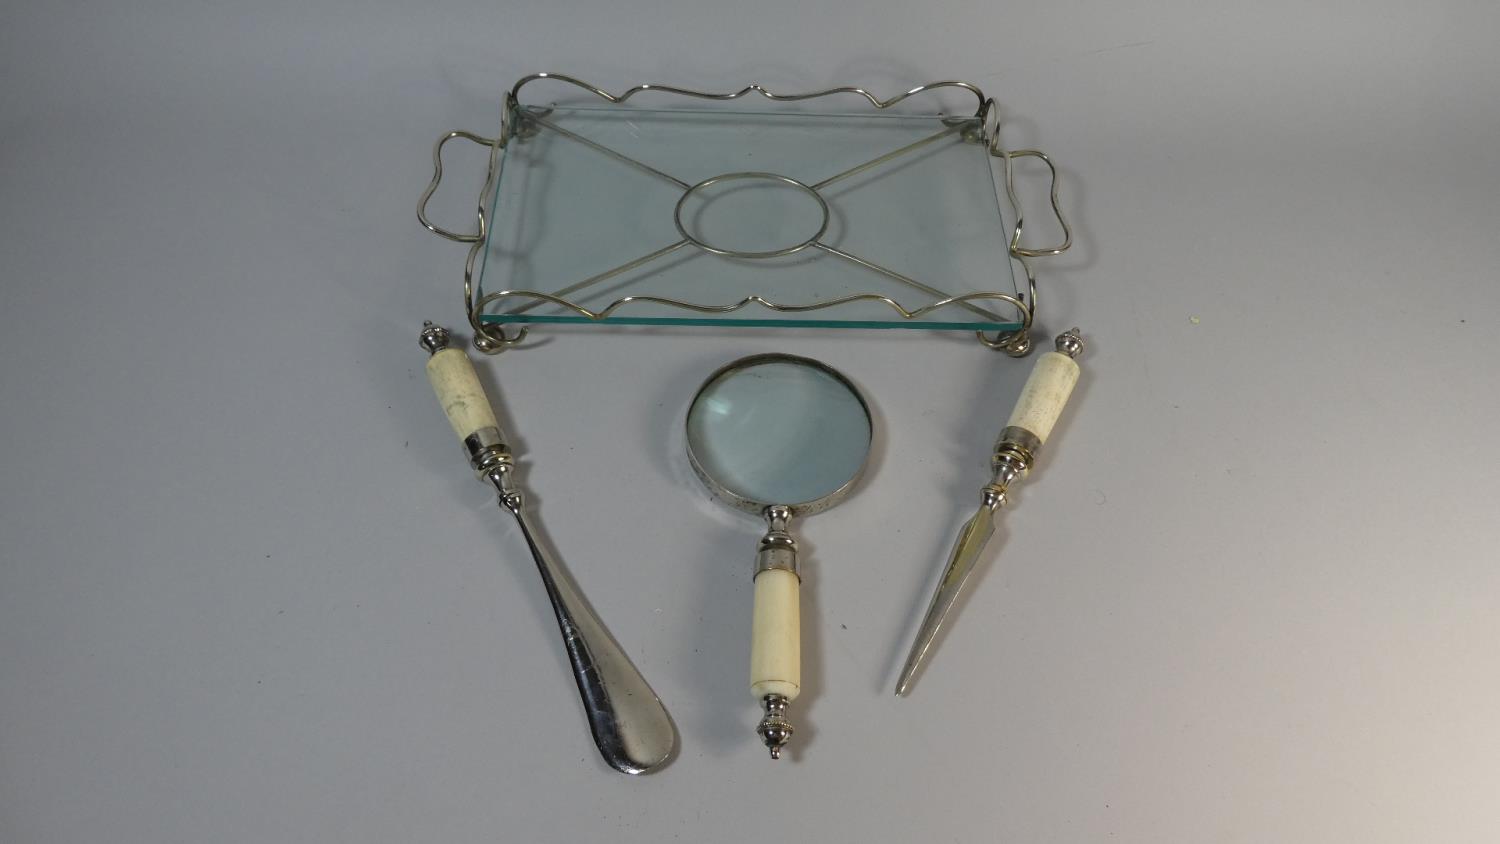 An Early 20th Century Art Deco Desk Set of Bone Handled Magnifying Glass, Letter Opener and Shoe